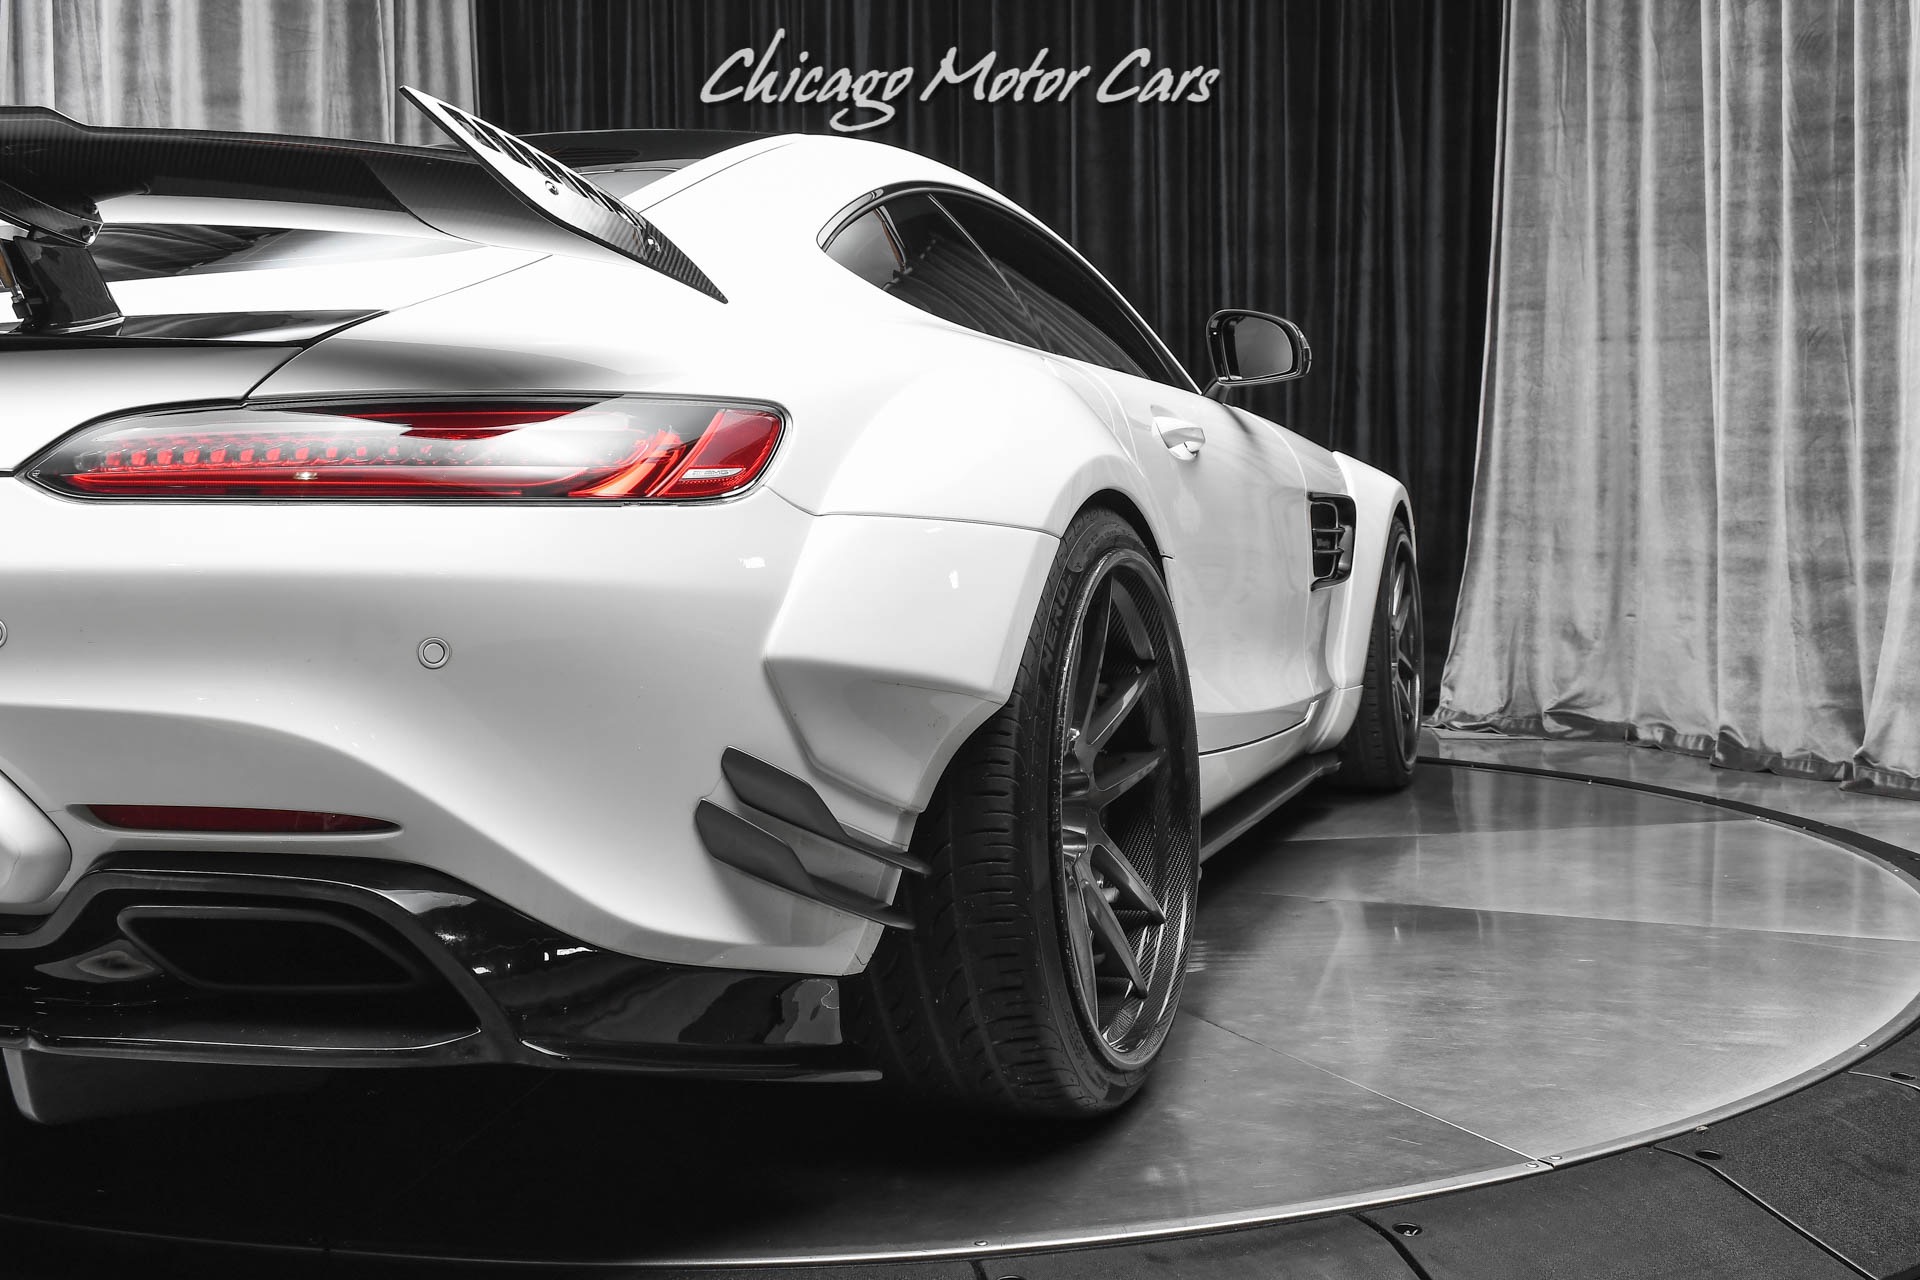 Used-2016-Mercedes-Benz-AMG-GTS-Coupe-PRIOR-Design-Wide-Body-UPGRADES-Carbon-Fiber-Stunning